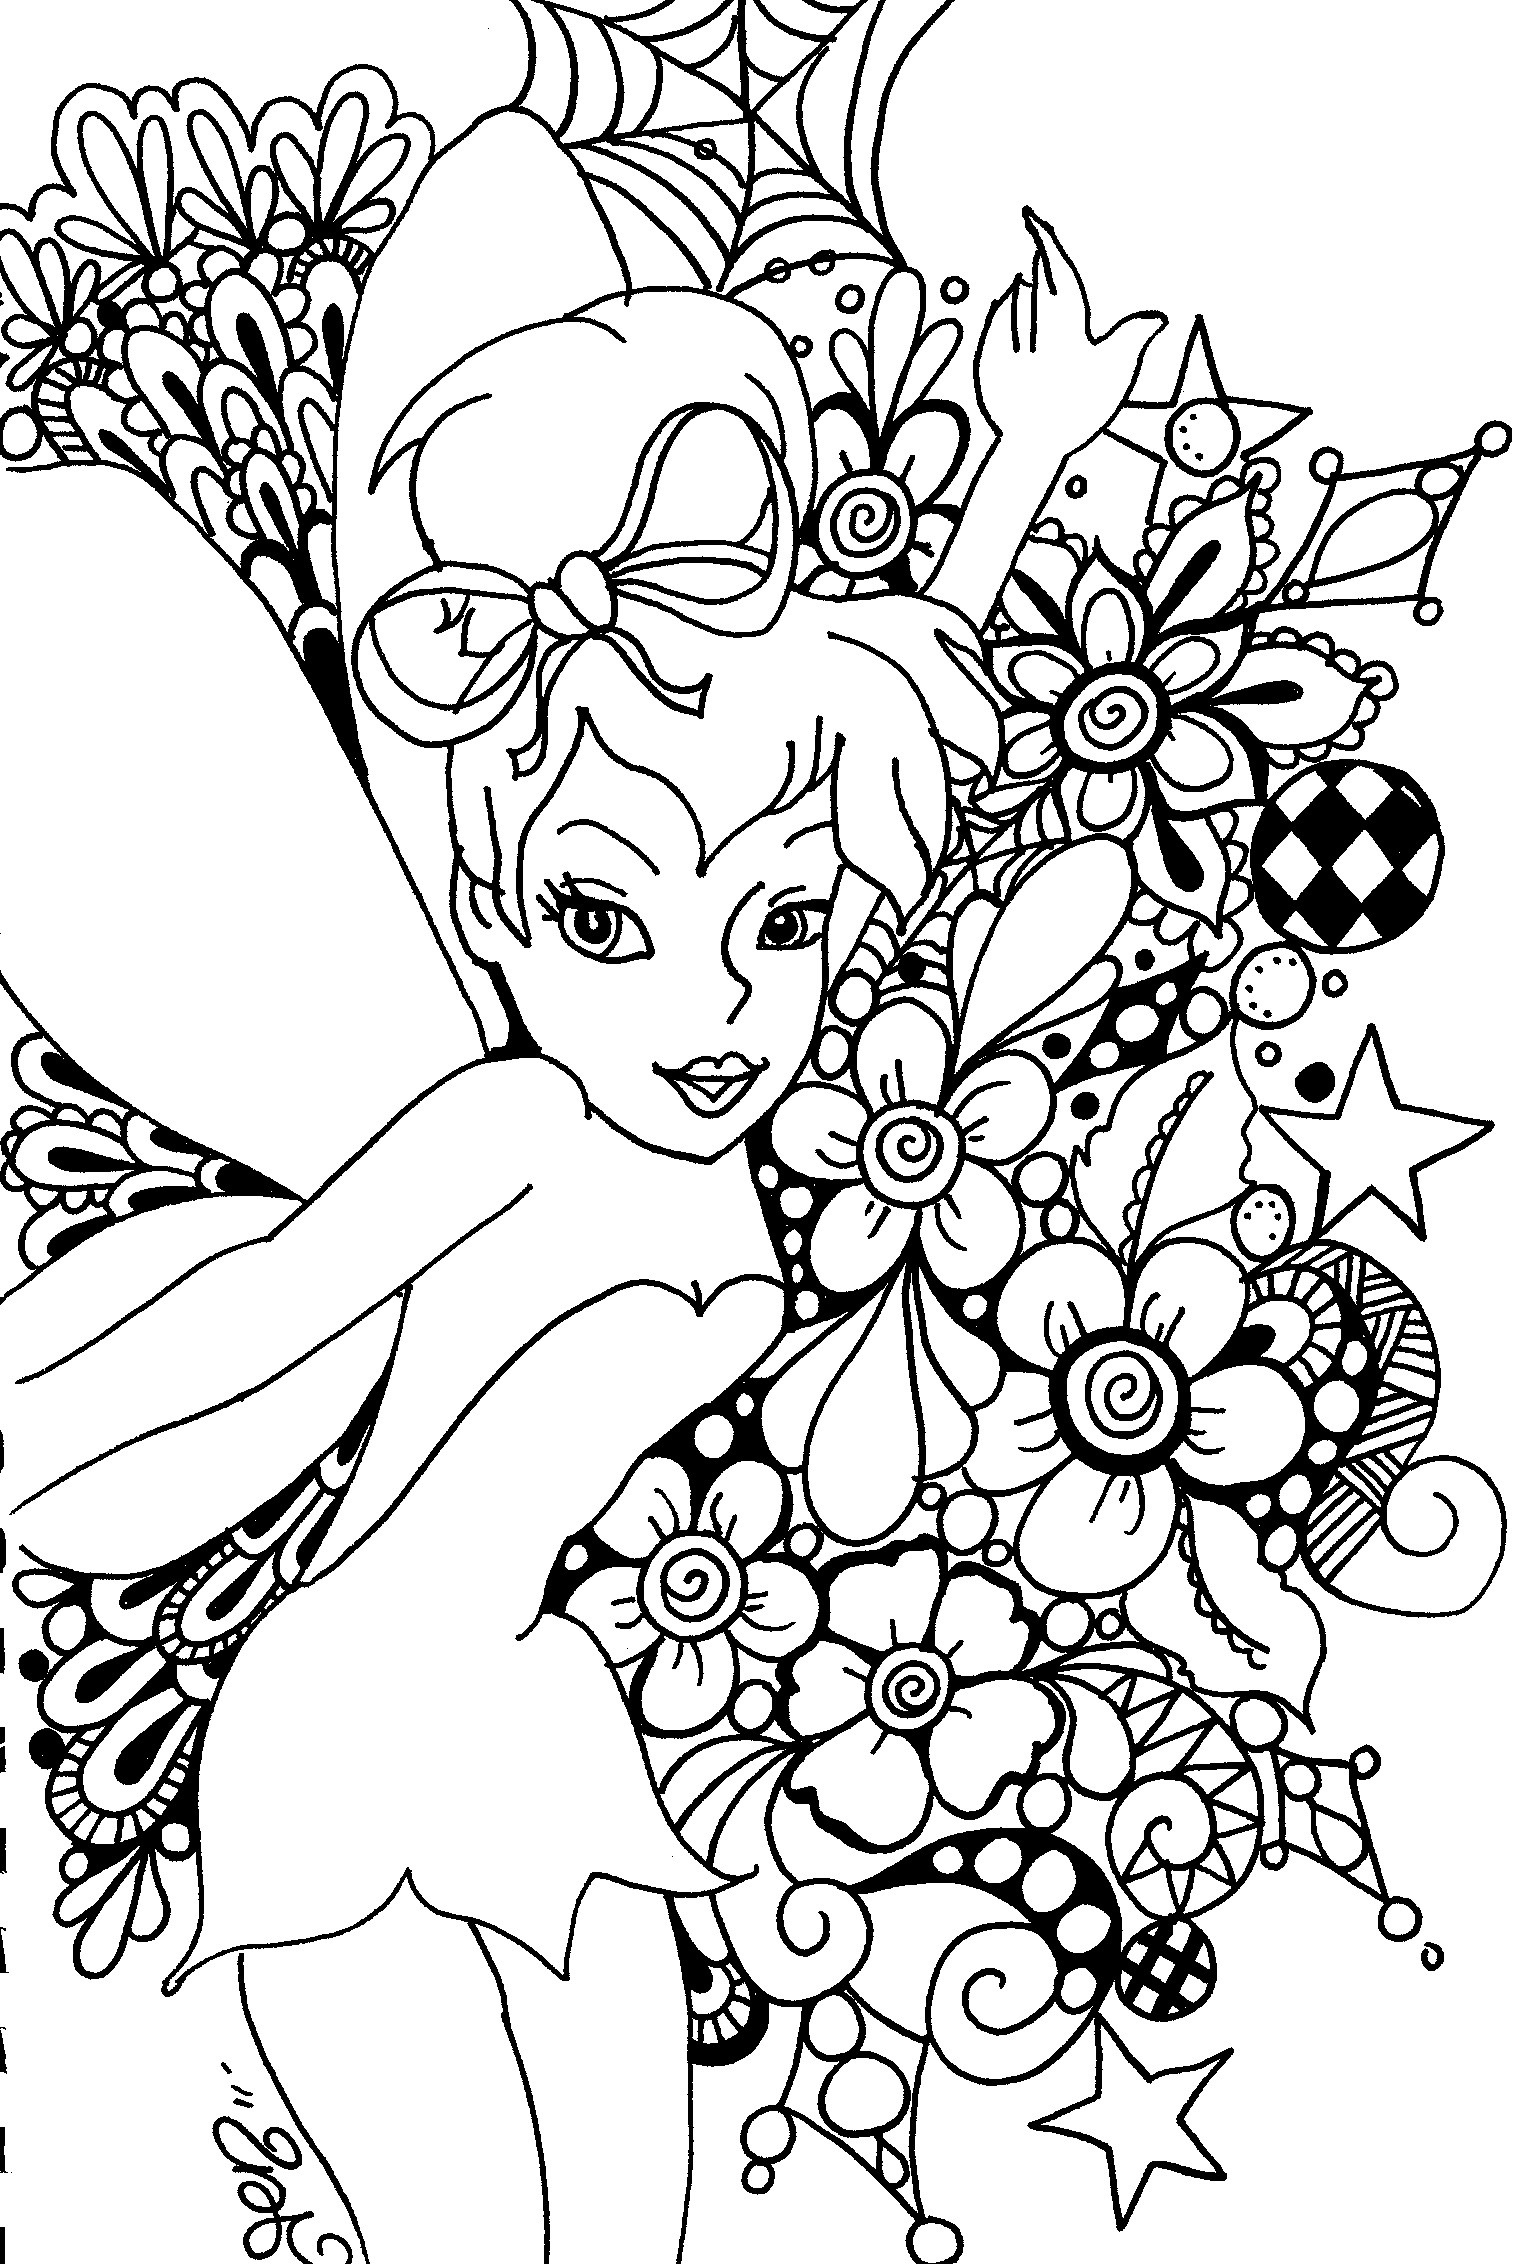 tinkerbell-printable-coloring-pages-disney